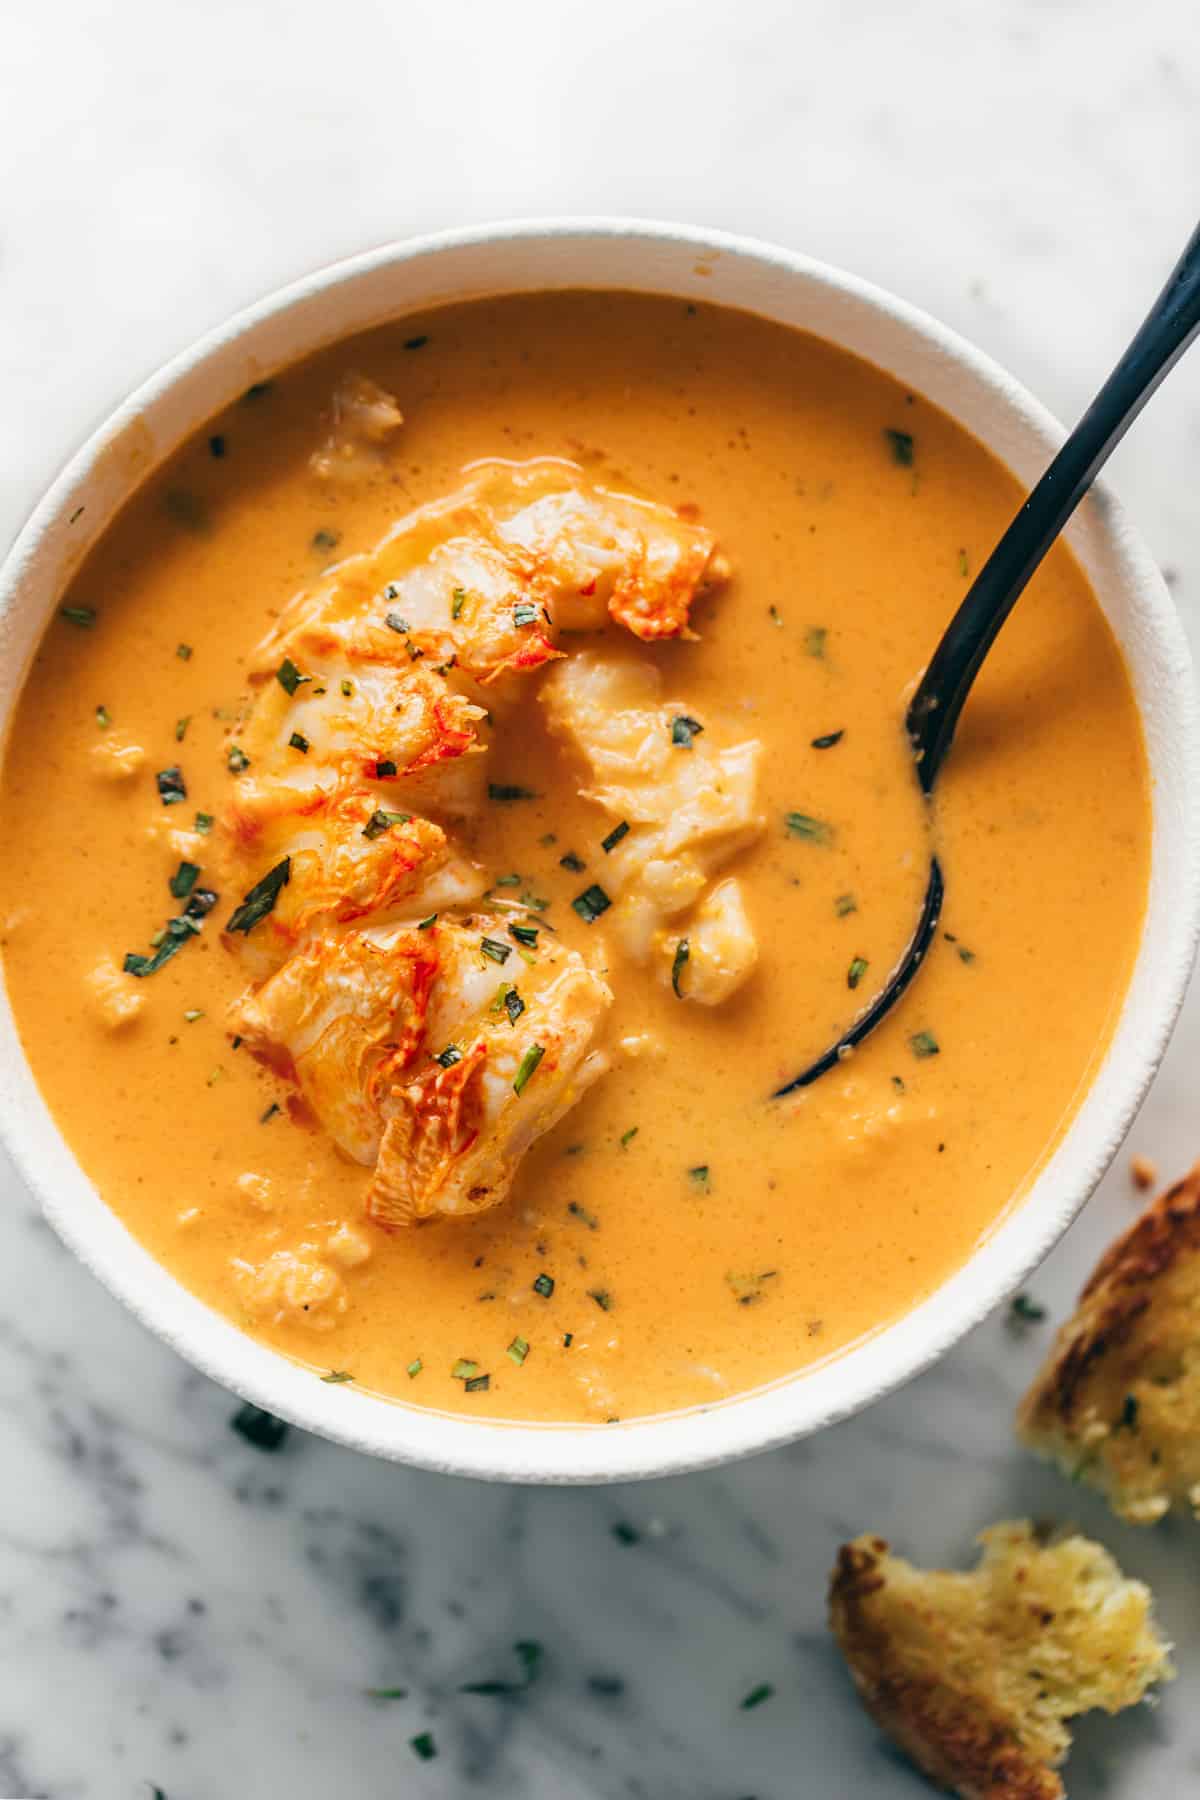 Lobster Bisque recipe made easy with big chunks of garlic butter lobster tails in every bite and a quick homemade stock! cafedelites.com #lobster #lobstertails #lobsterbisque